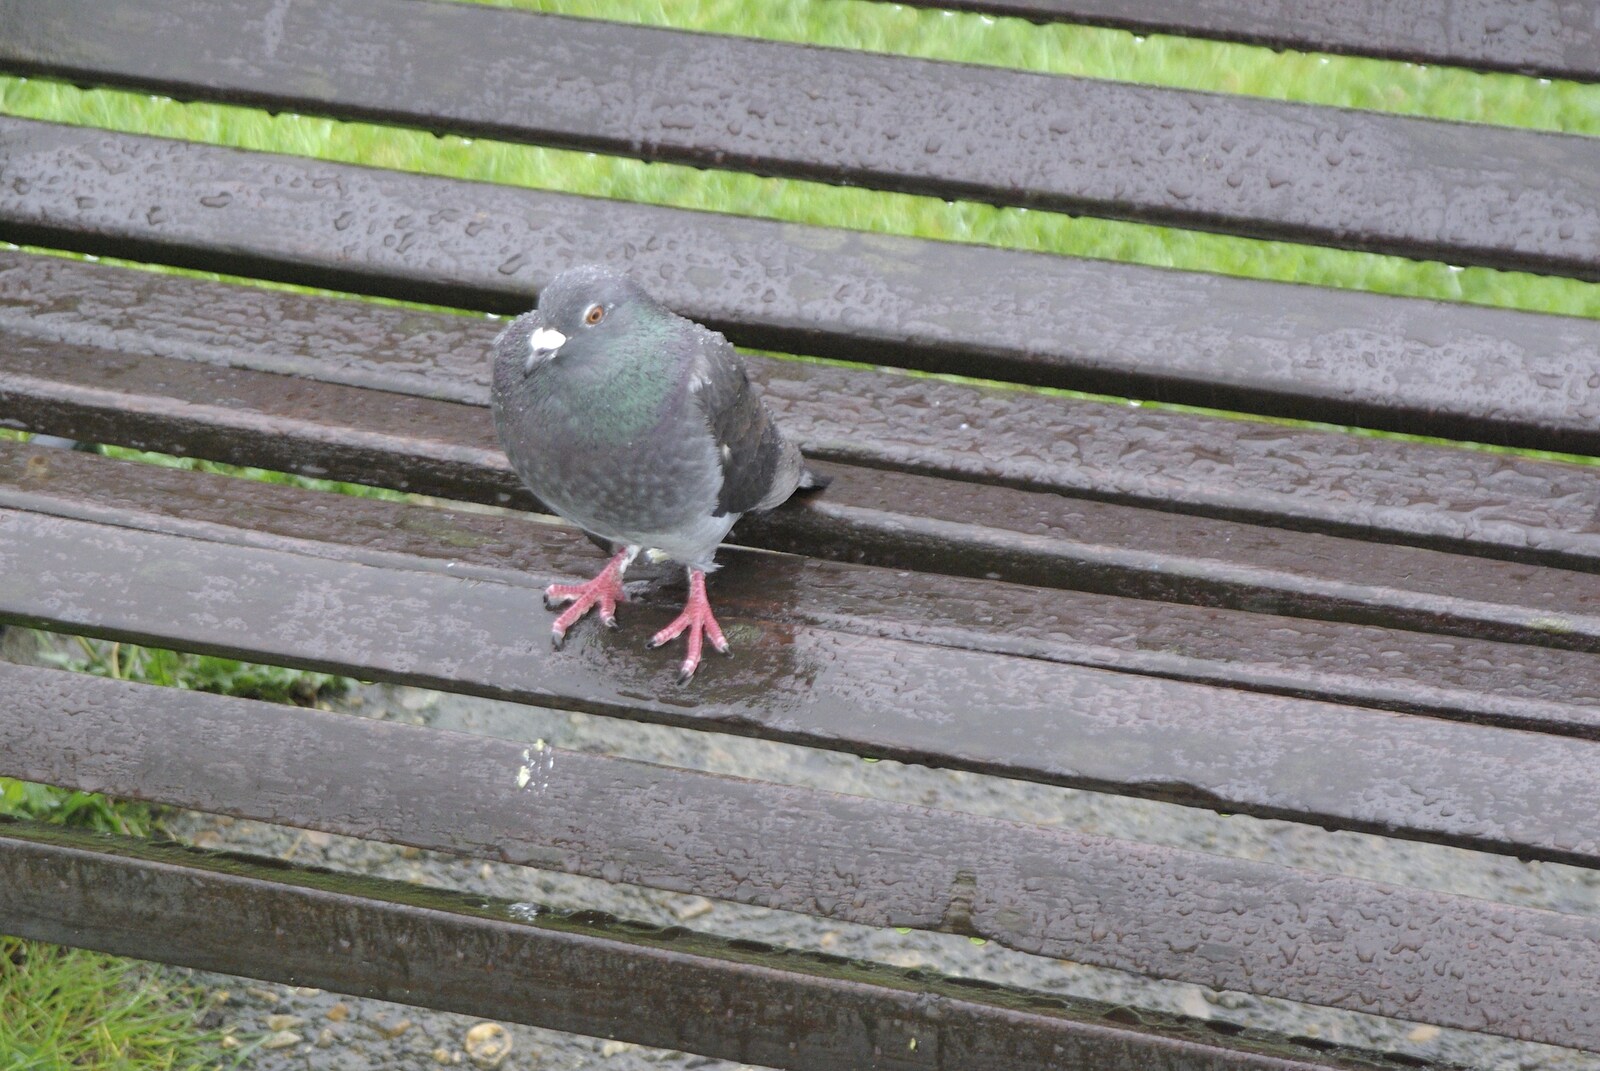 Nosher's Birthday Trip, New Milton, Hampshire - 26th May 2007: A pigeon enjoys the inclement weather